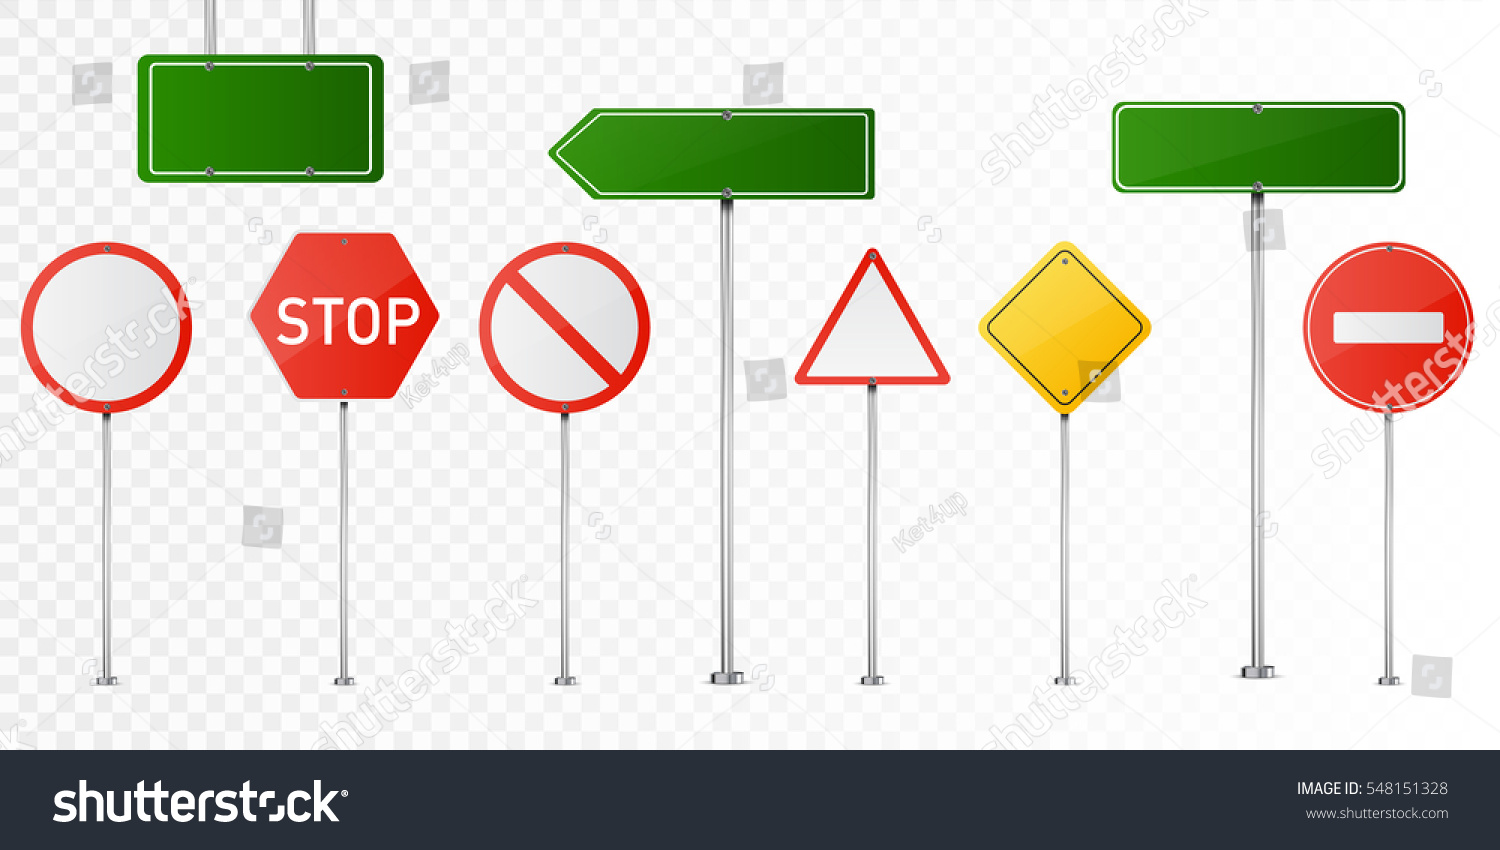 Set of road signs isolated on transparent background. Vector illustration. #548151328